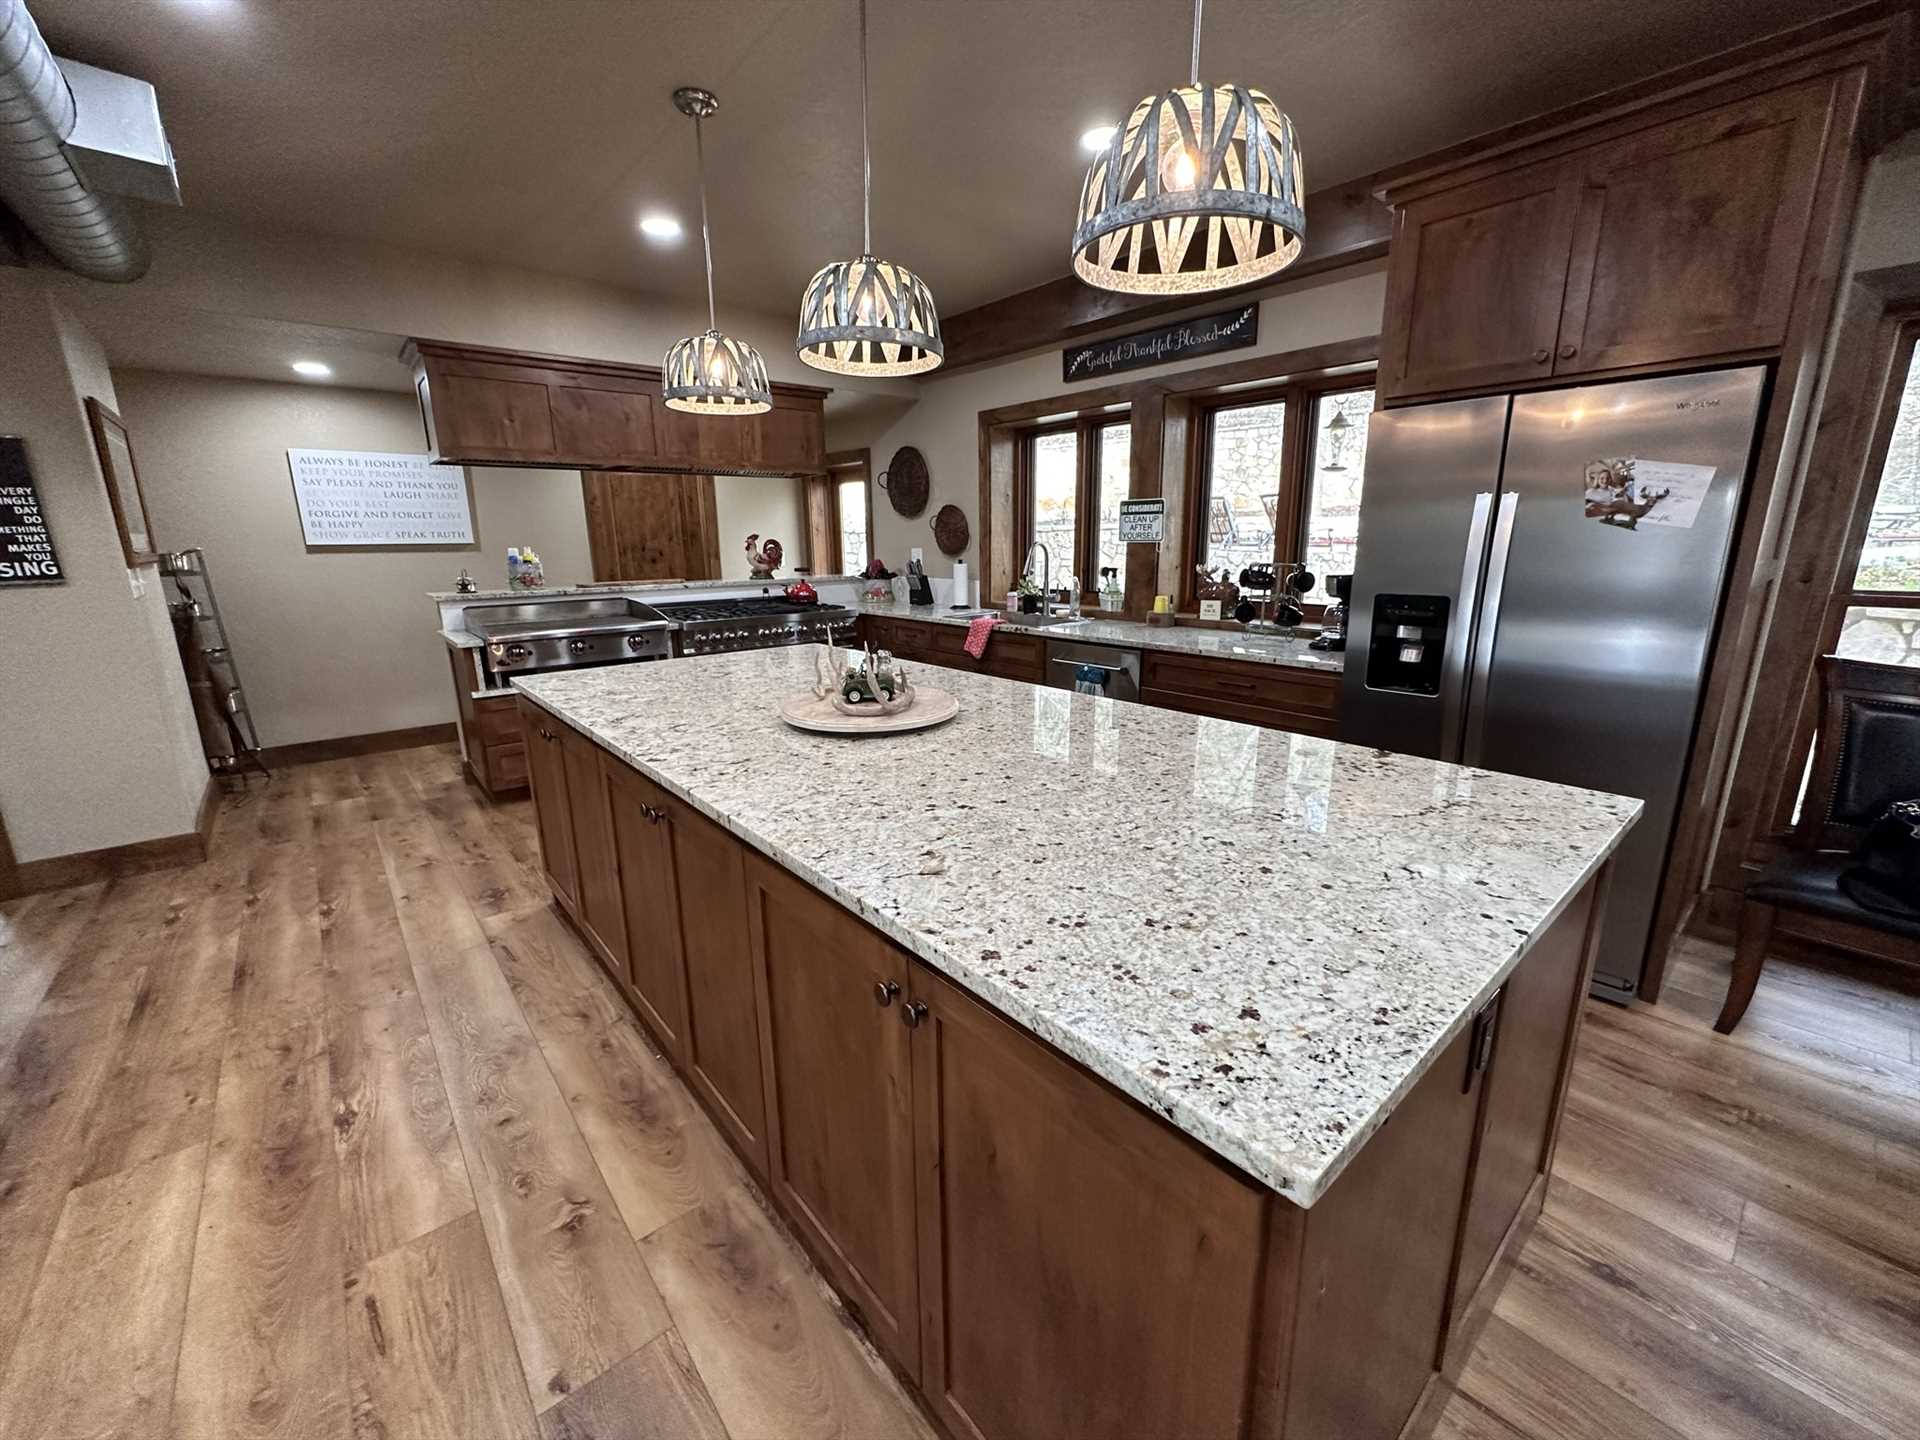                                                 A huge island creates a visual centerpiece in the kitchen, as well as tons of food prep space! There's also plenty of cooking and serving ware, glasses and utensils on hand.